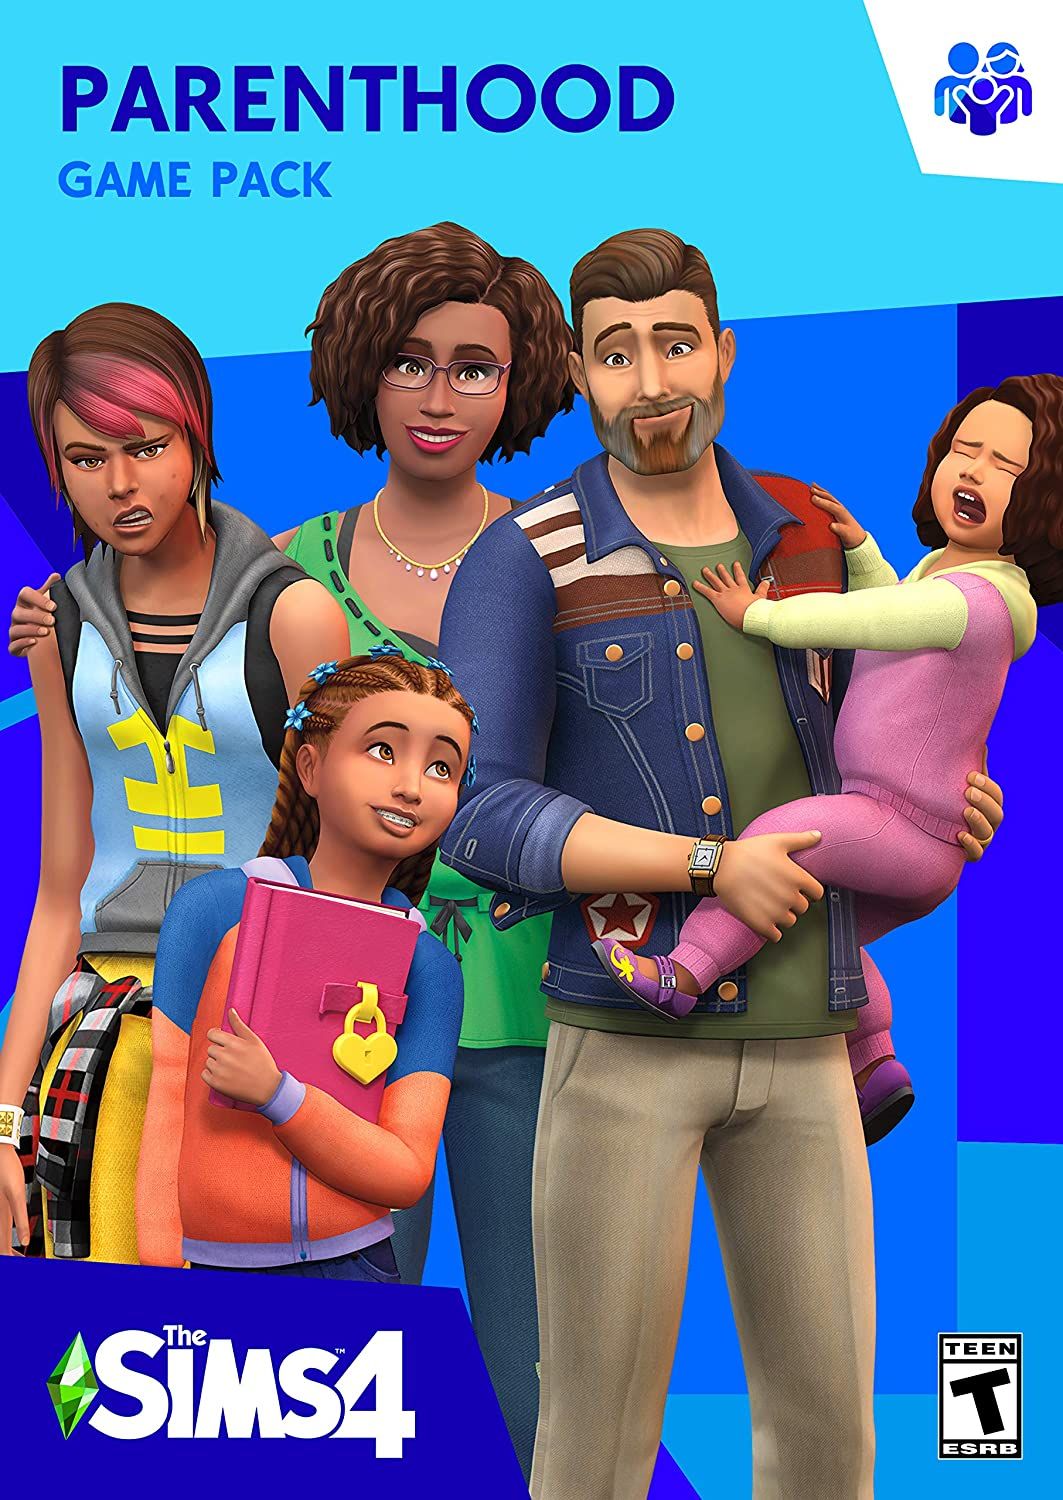 sims 4 all expansion packs download free 2019